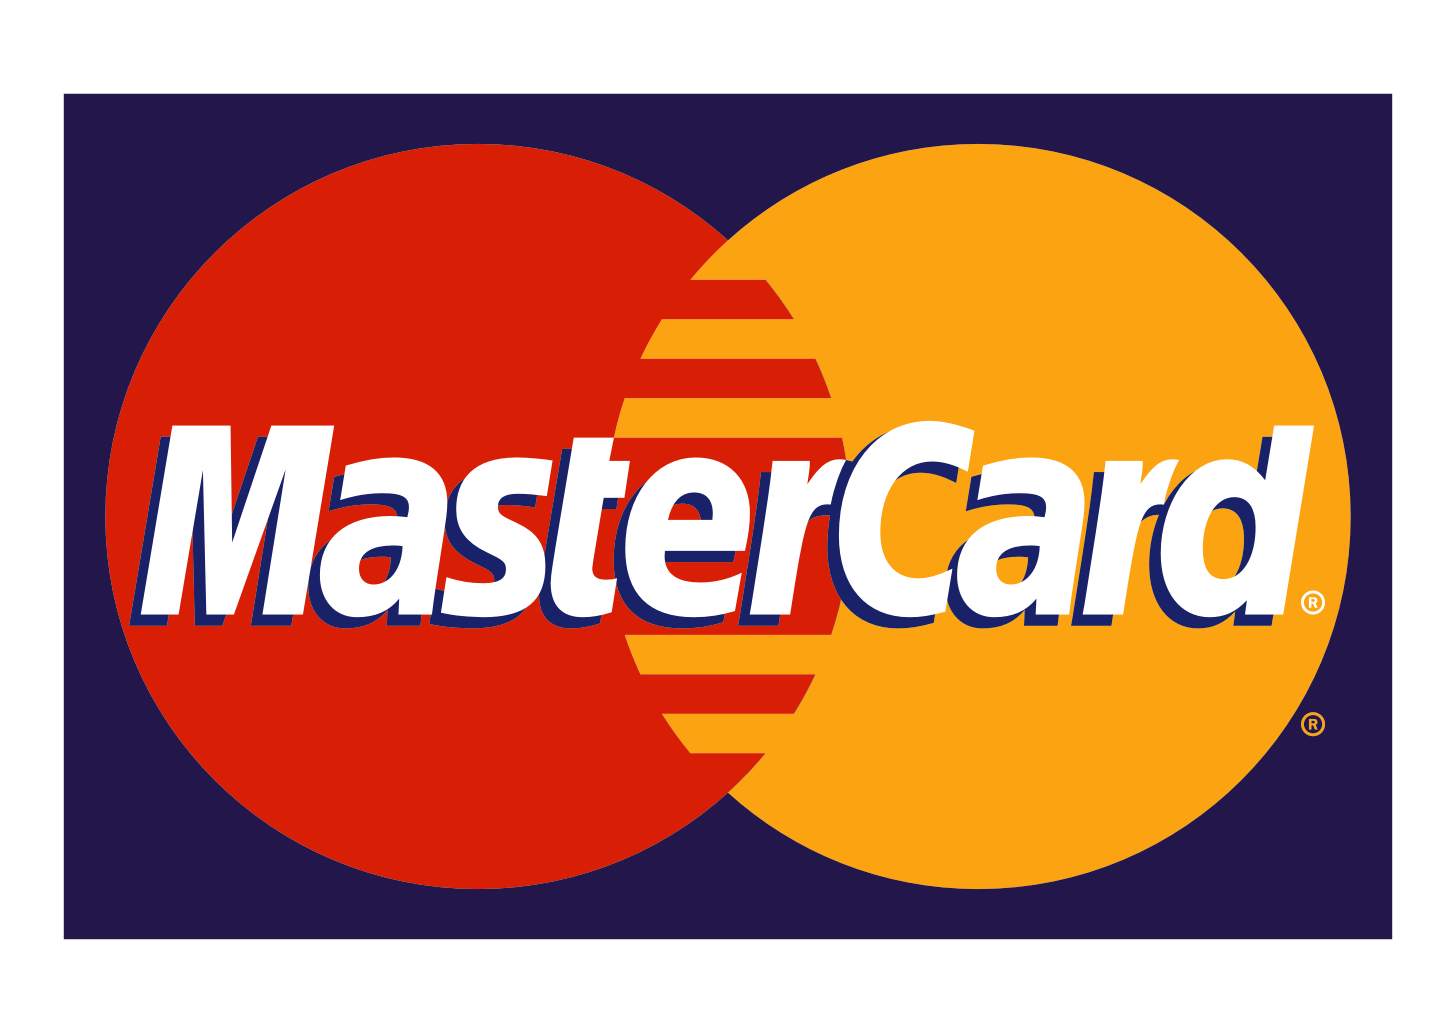 These Analysts Revise Price Targets On Mastercard Following Upbeat Q4 Earnings